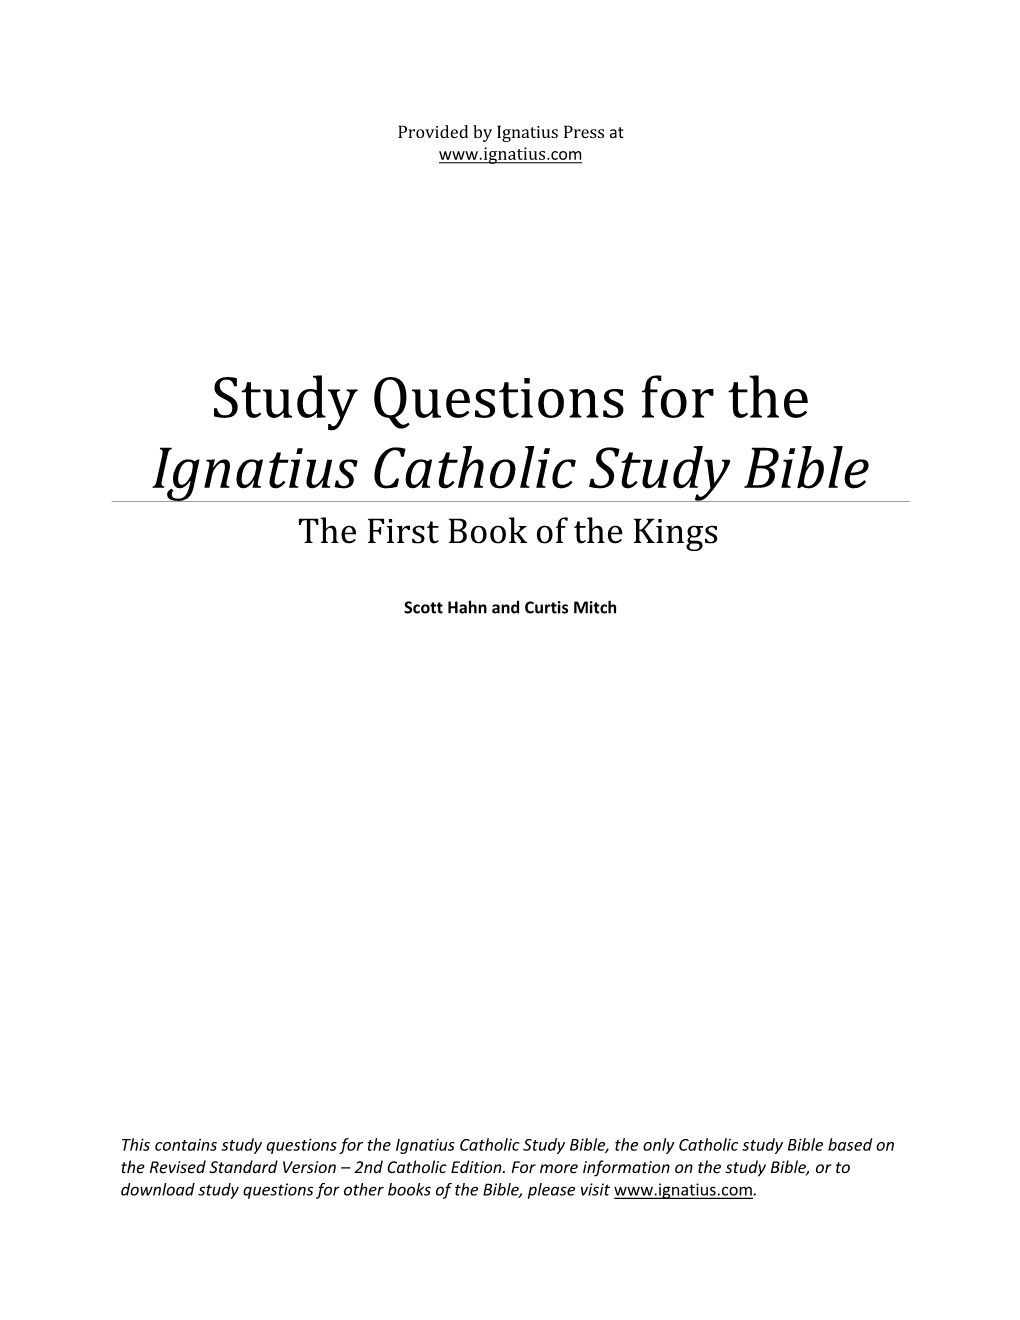 Study Questions for the Ignatius Catholic Study Bible The